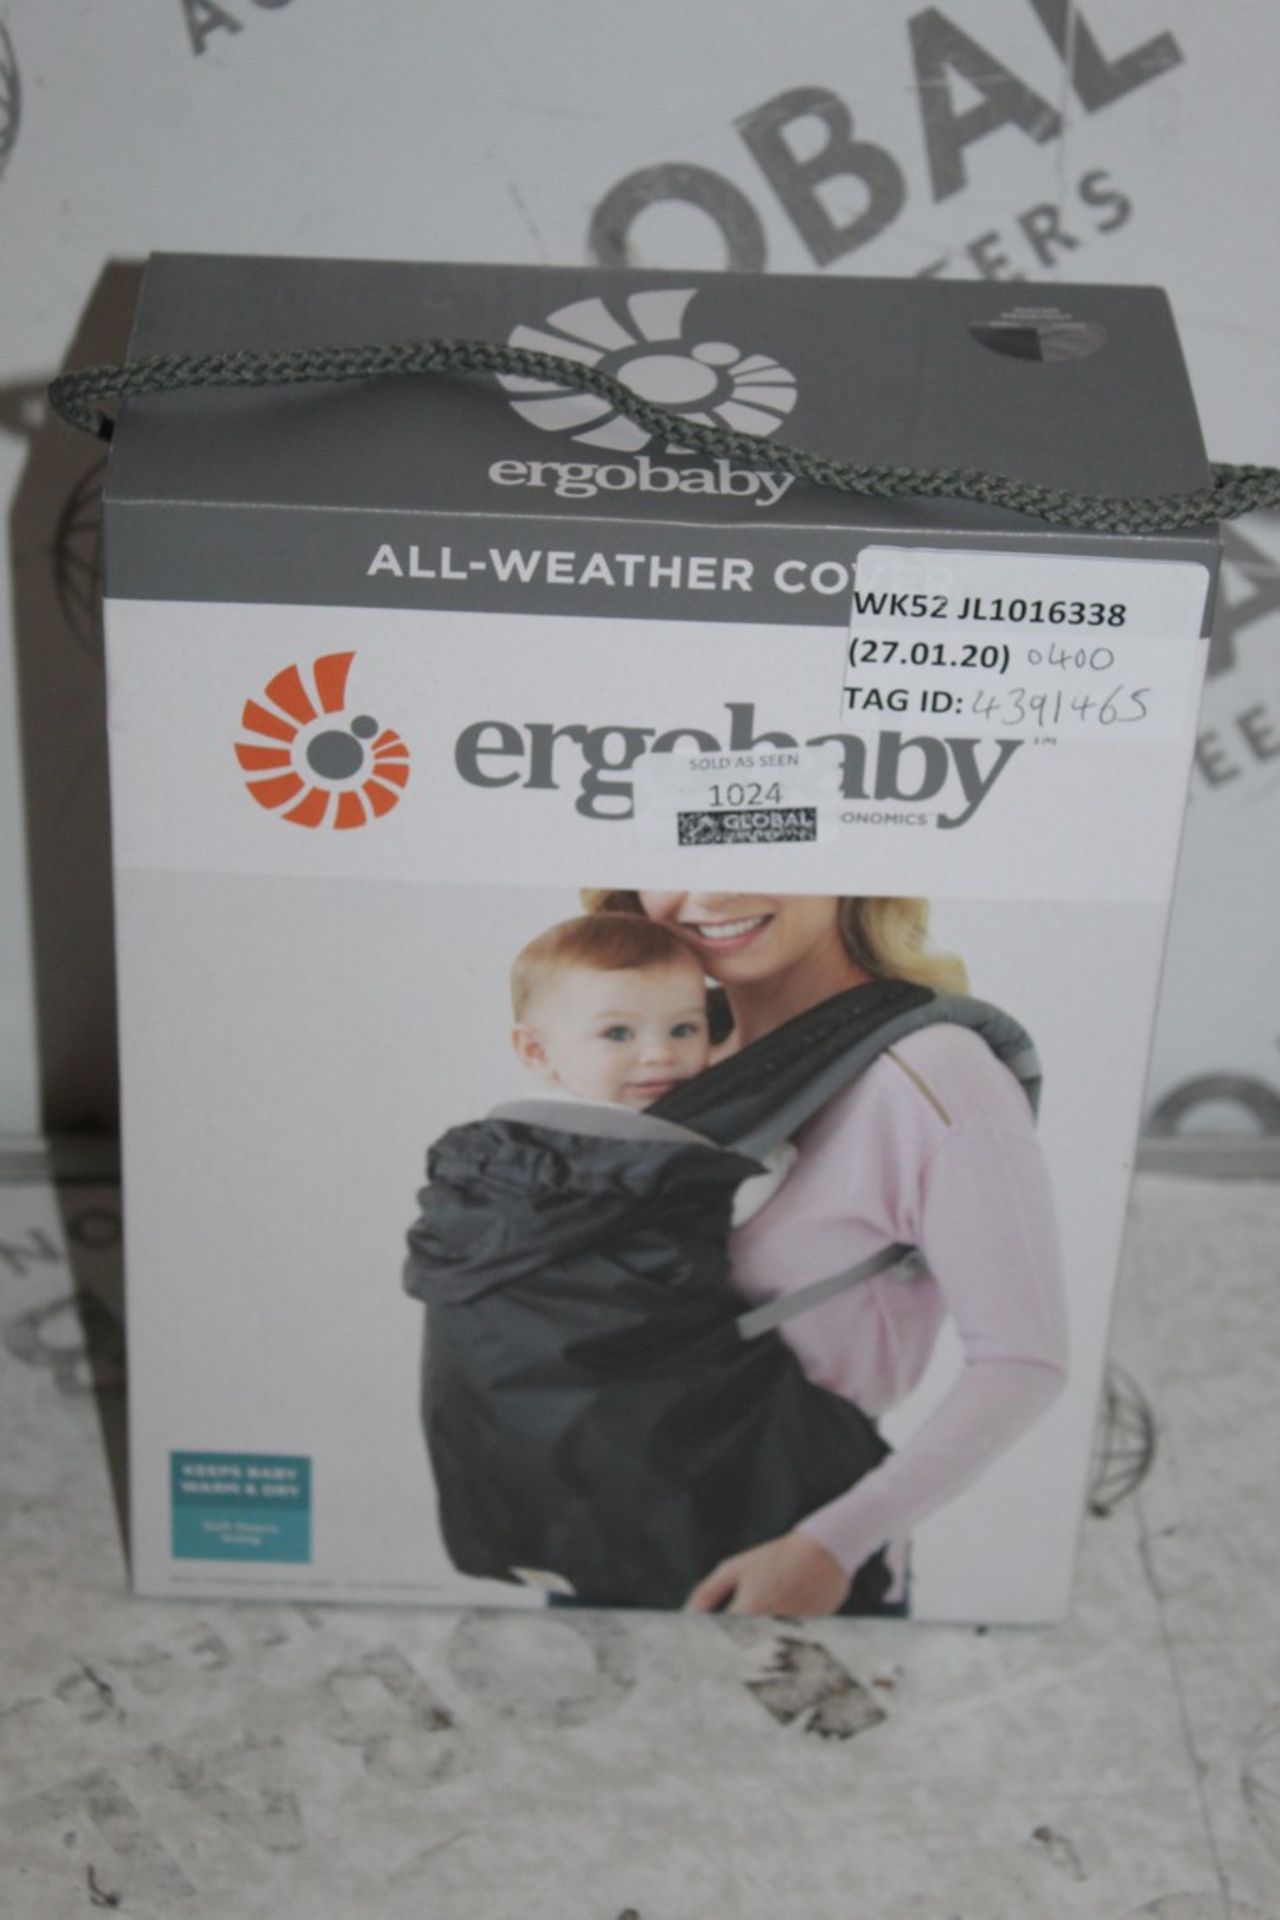 Boxed Urgobaby All Weather Cover RRP £50 (4391465) (Public Viewing and Appraisals Available)